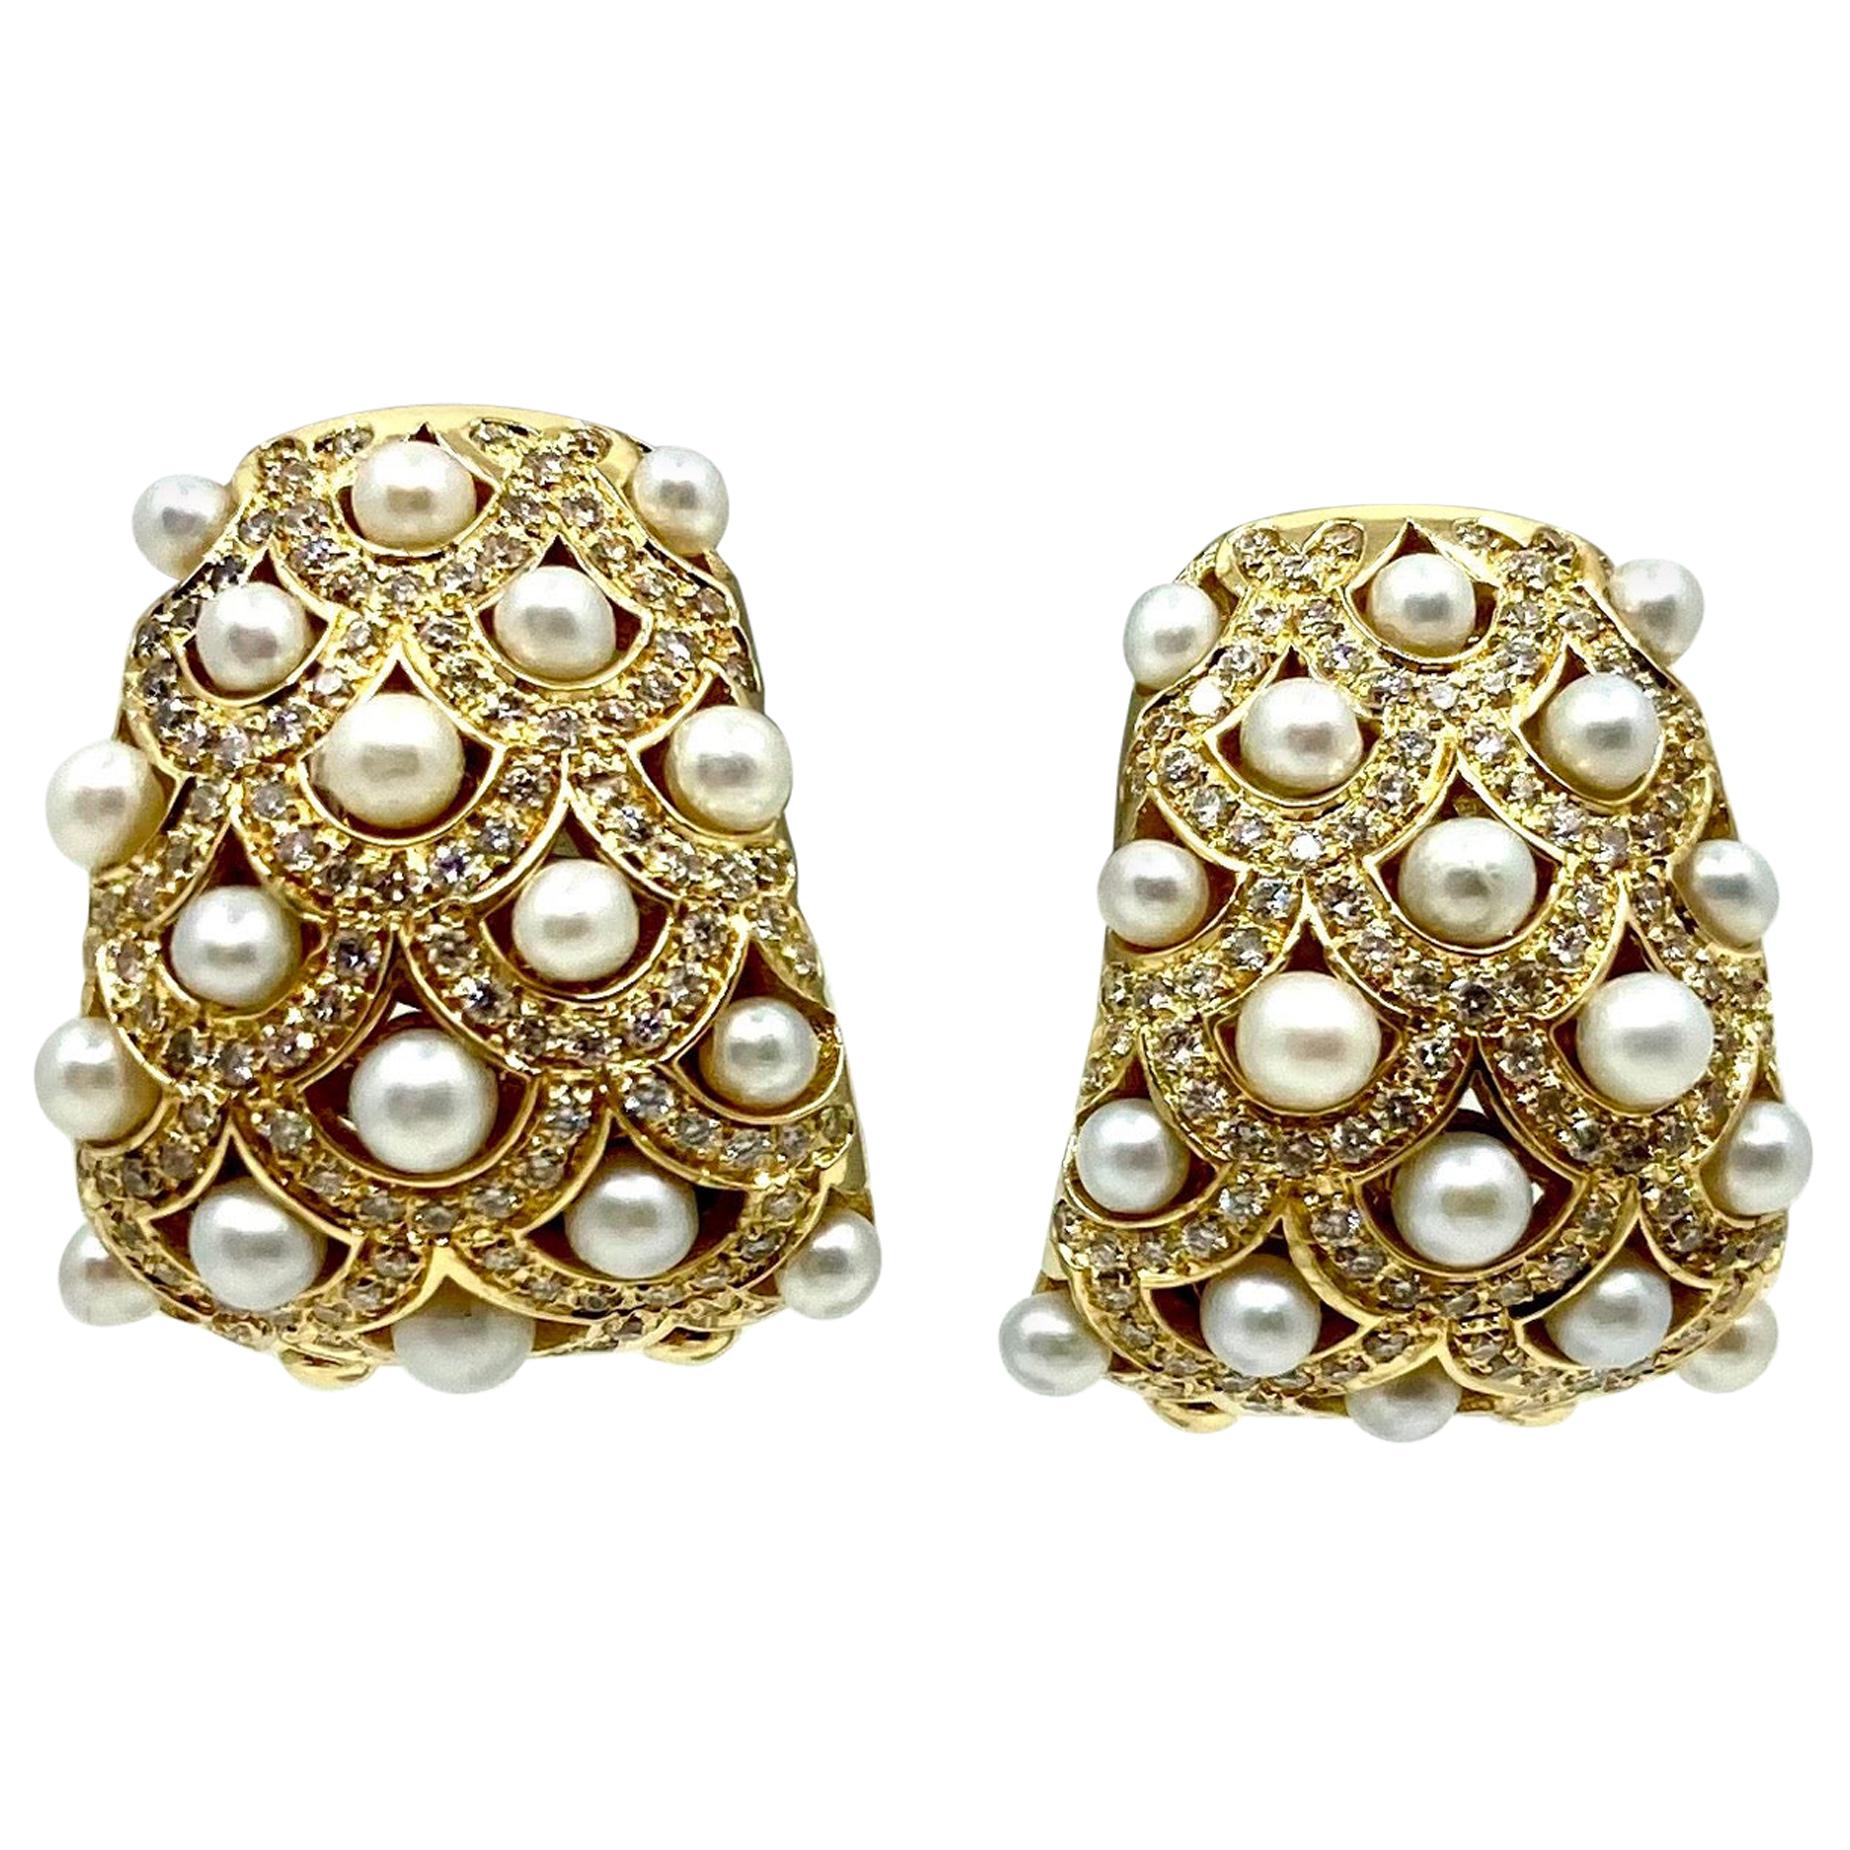 18 Karat Gold Pearls and Diamonds Earrings For Sale